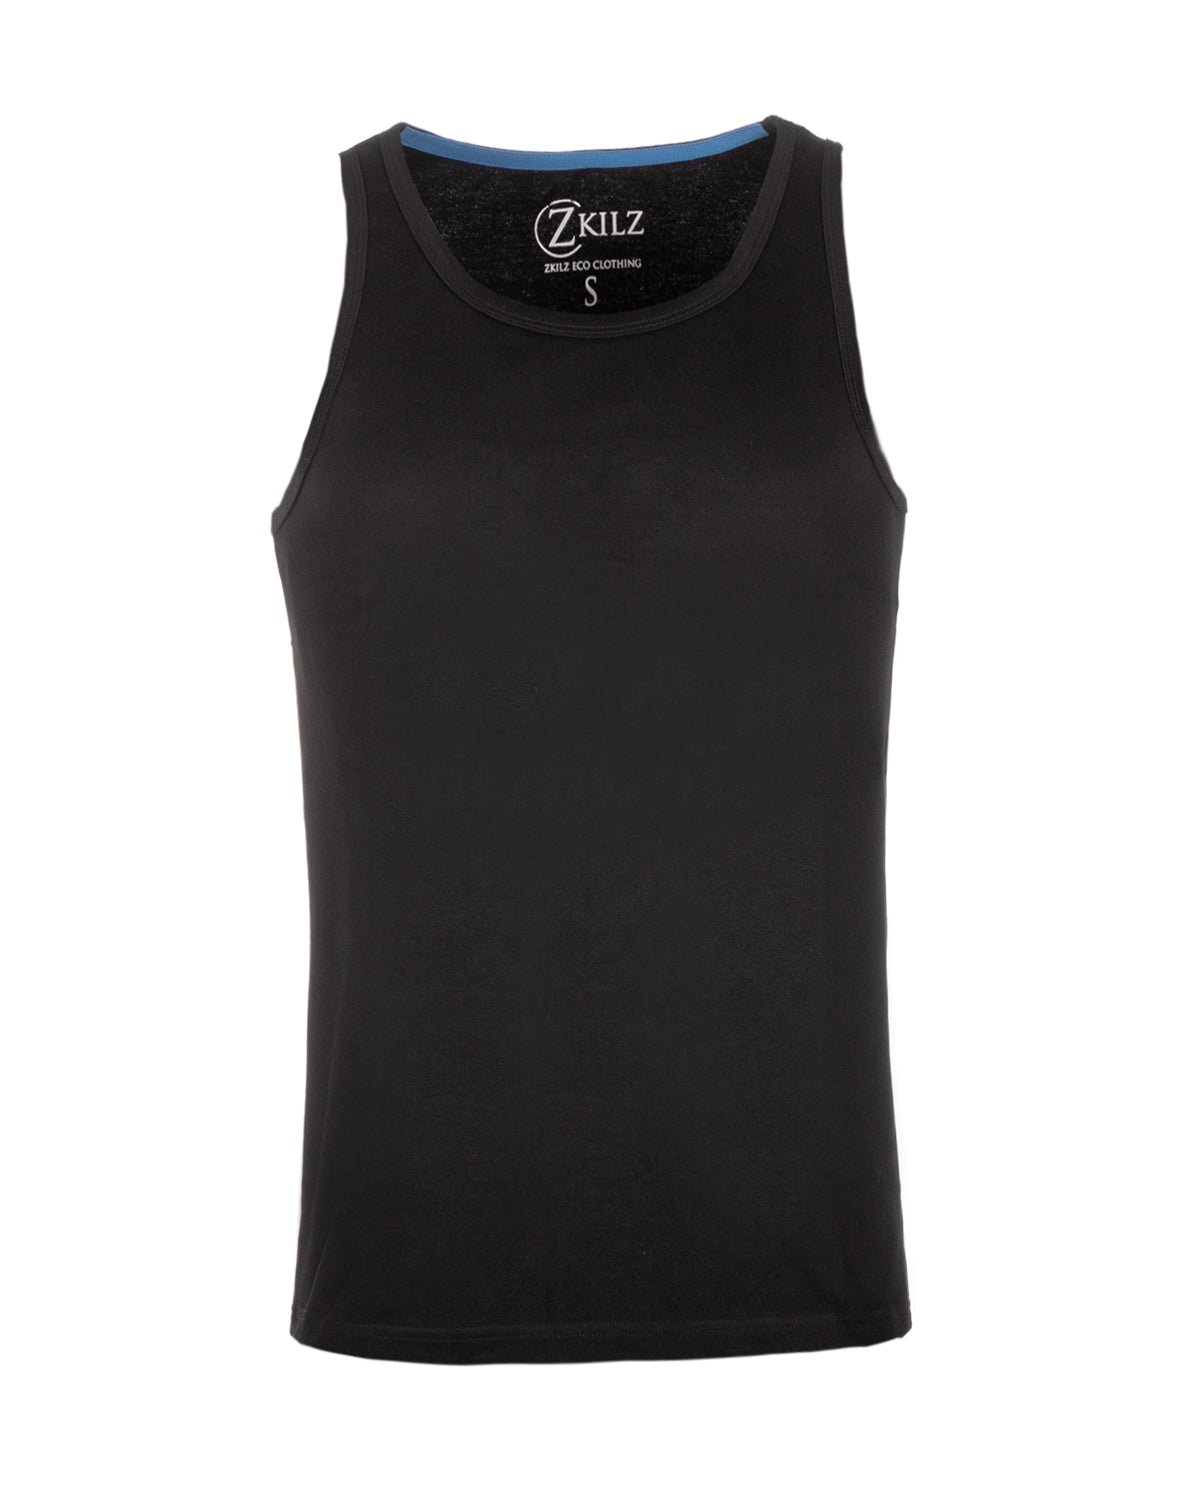 Men's sleeveless shirts from domestic online store